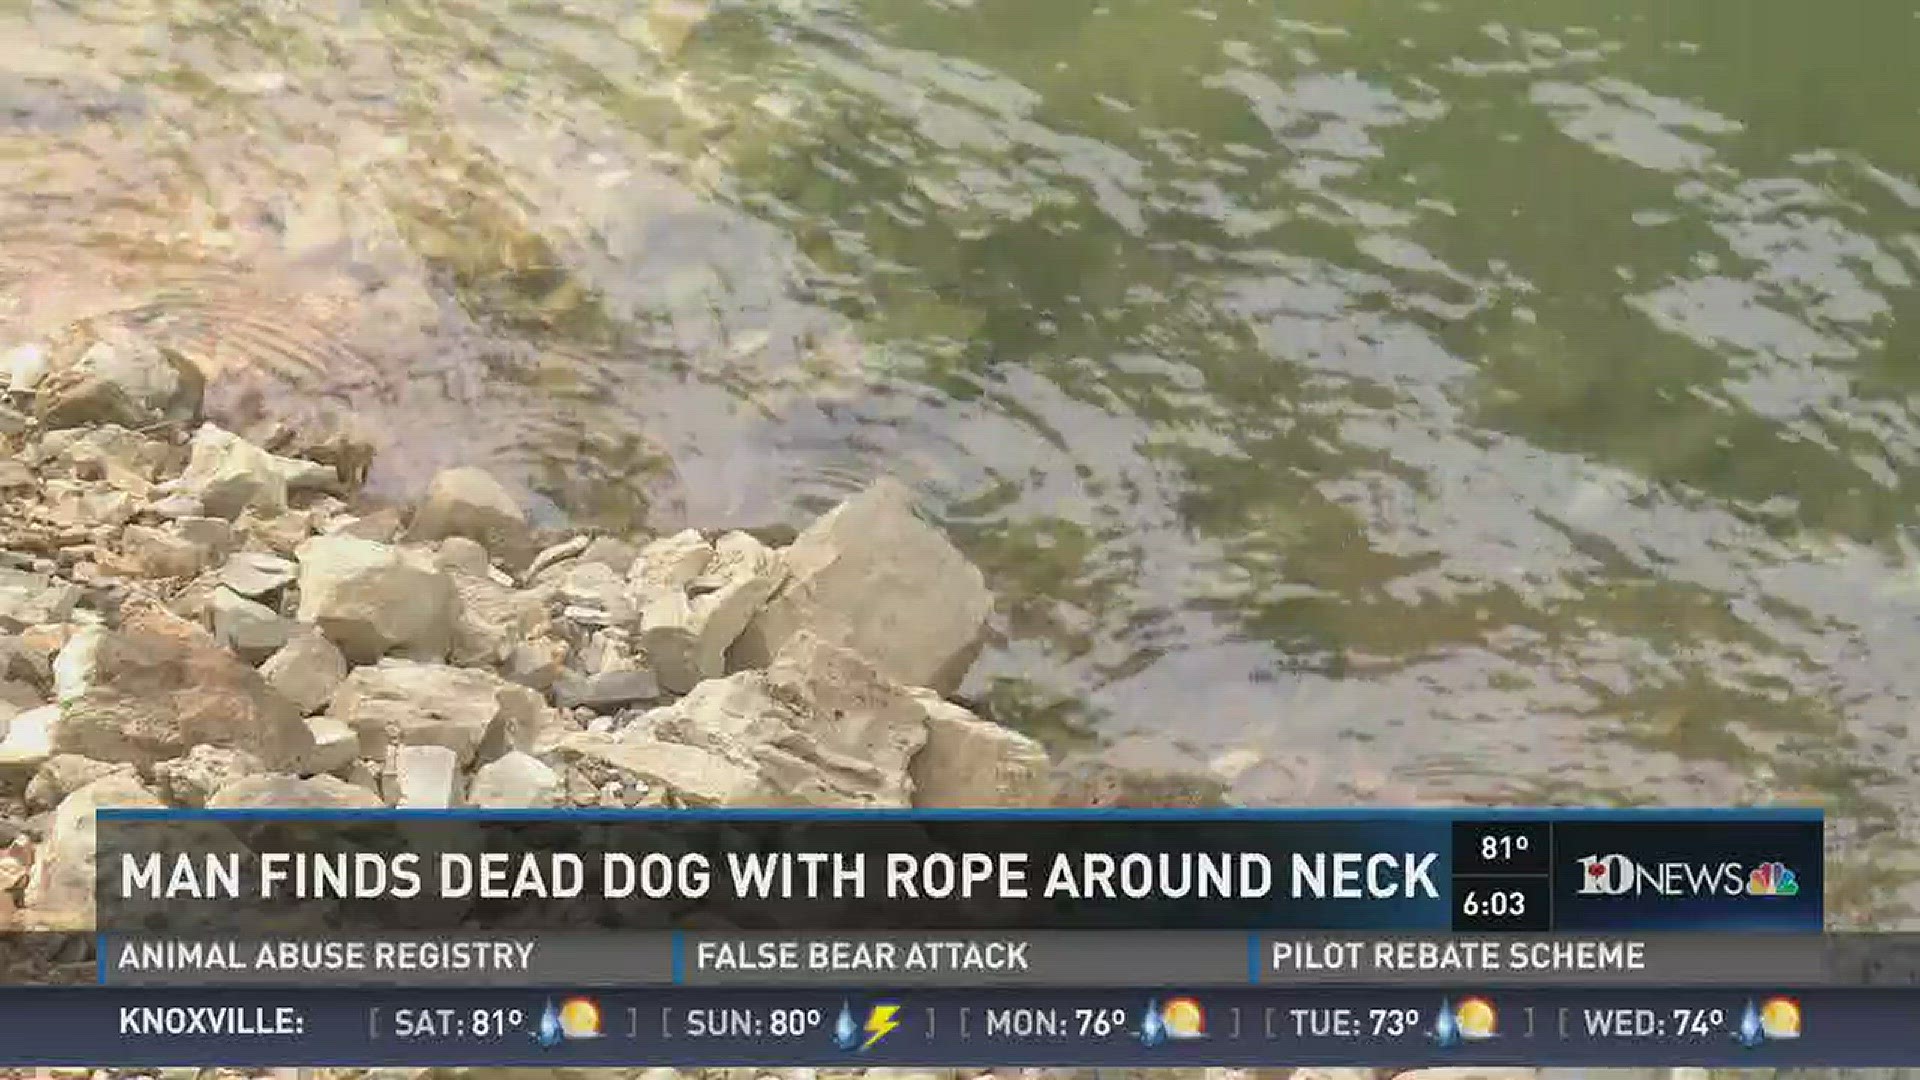 Grainger County authorities are investigating dog found floating in Norris Lake.